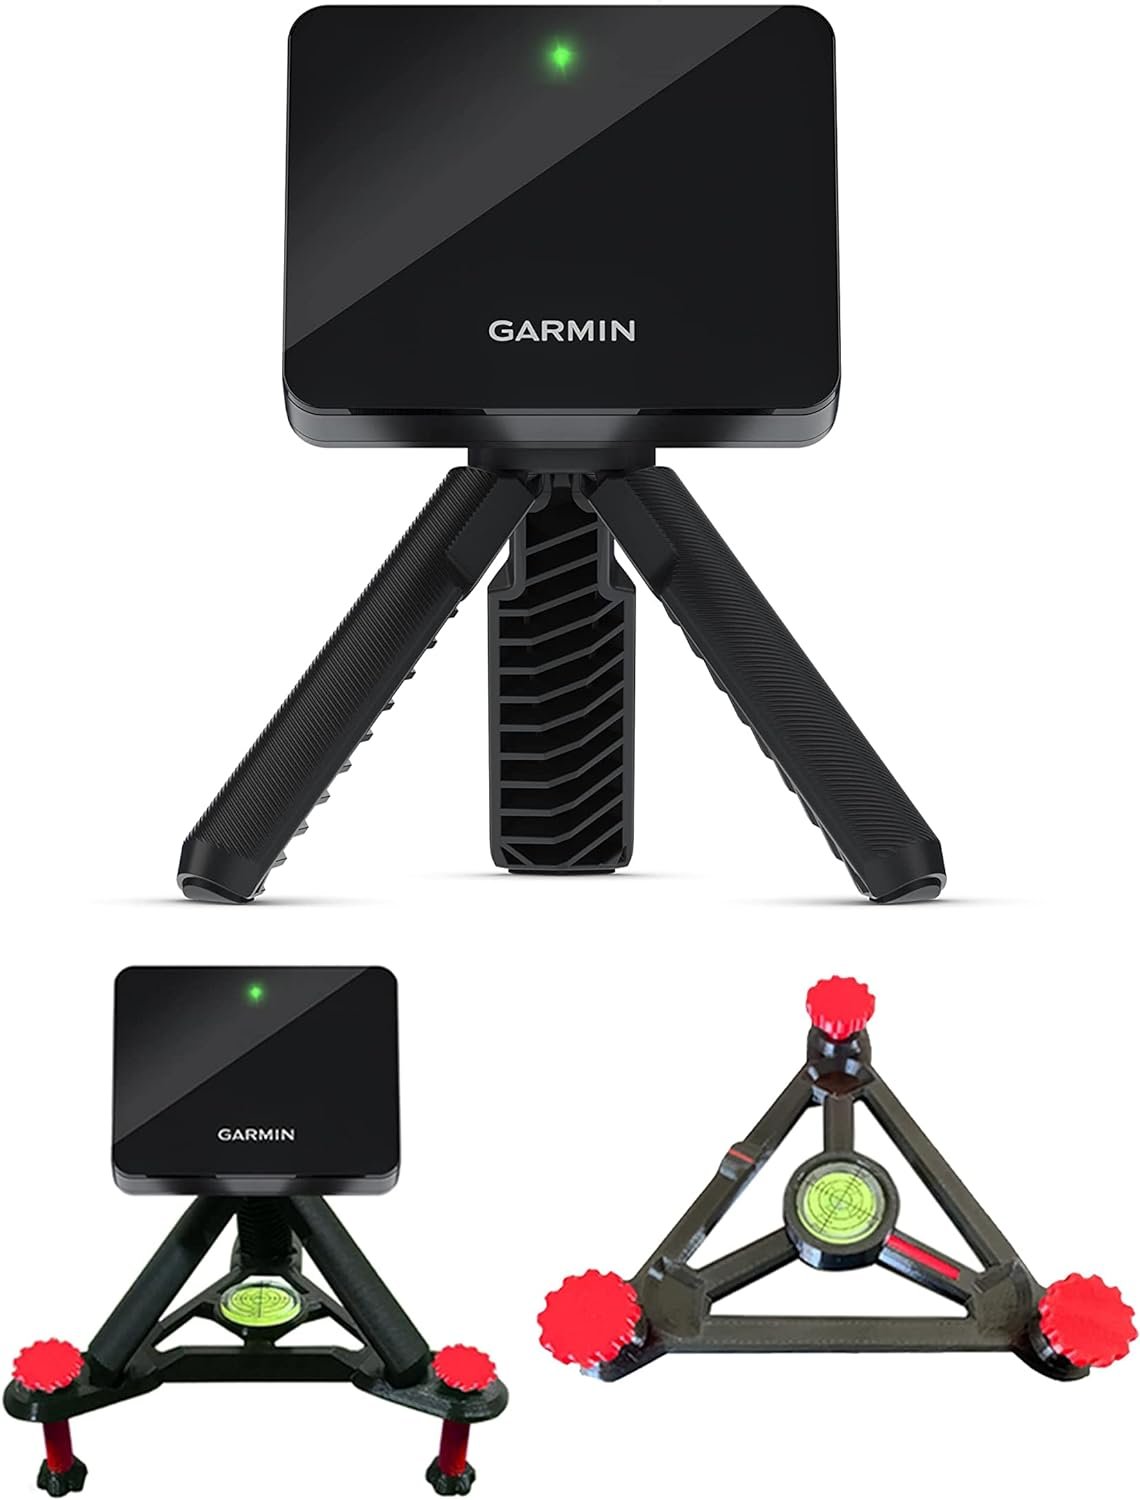 Garmin Approach R10 Portable Golf Launch Monitor  Simulator with PlayBetter Alignment Stand Bundle - Great for Home, Outdoor  Indoor, Projector Compatible, Software Accuracy Upgraded